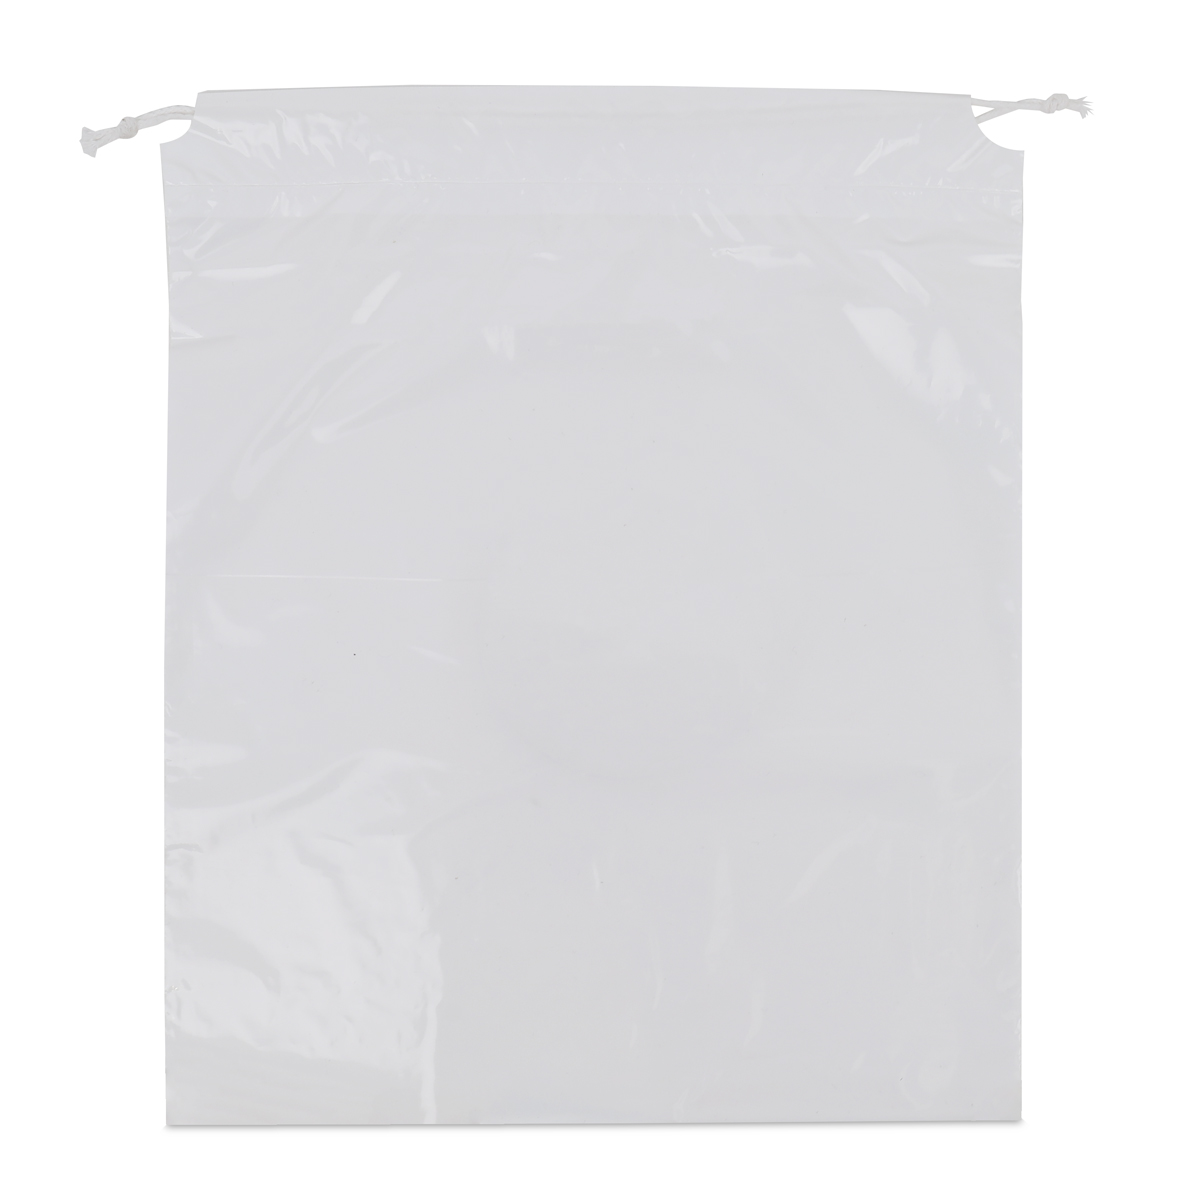 Plastic laundry bags with drawstring